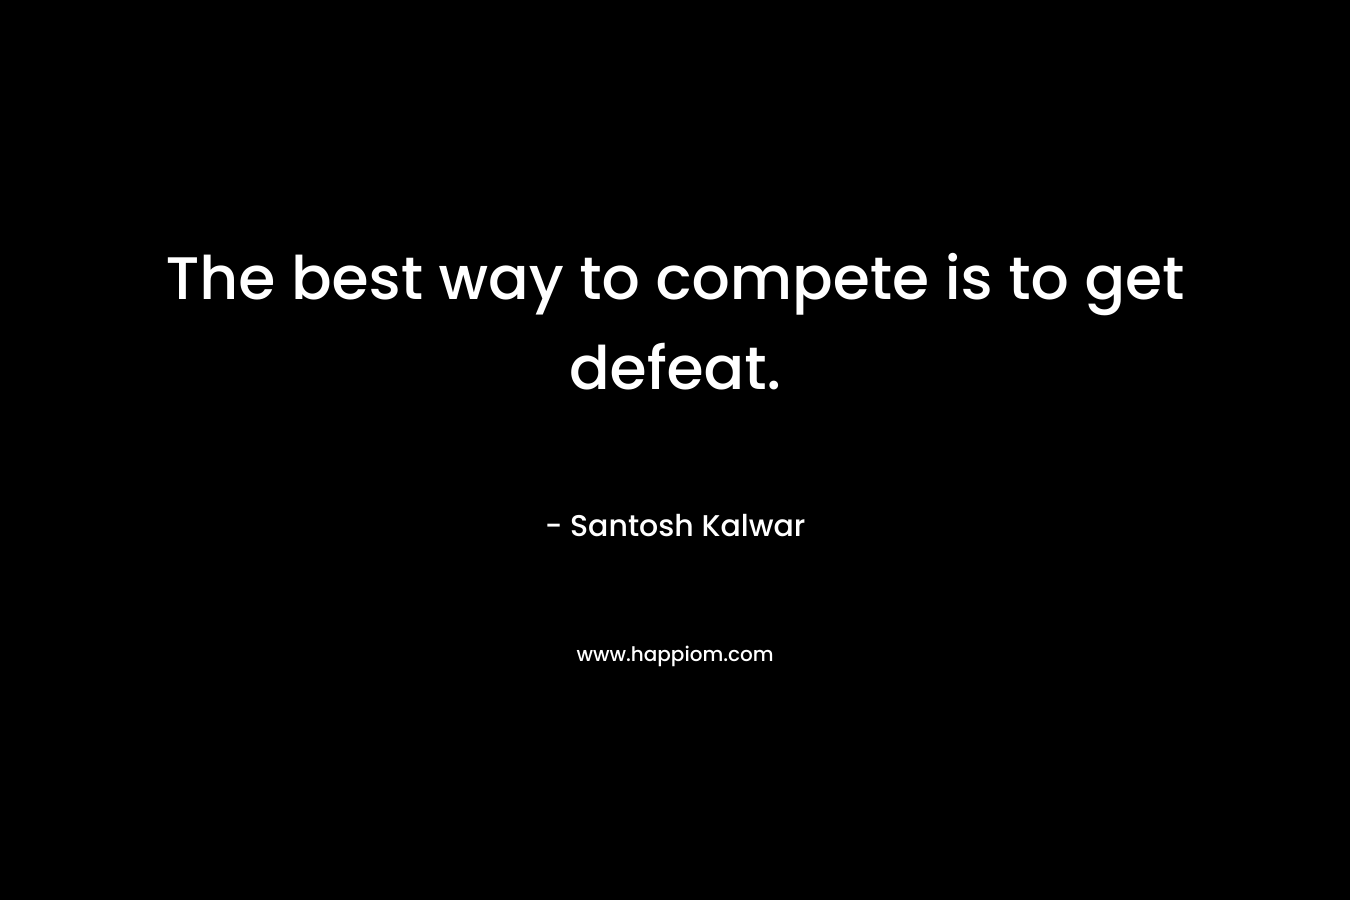 The best way to compete is to get defeat.